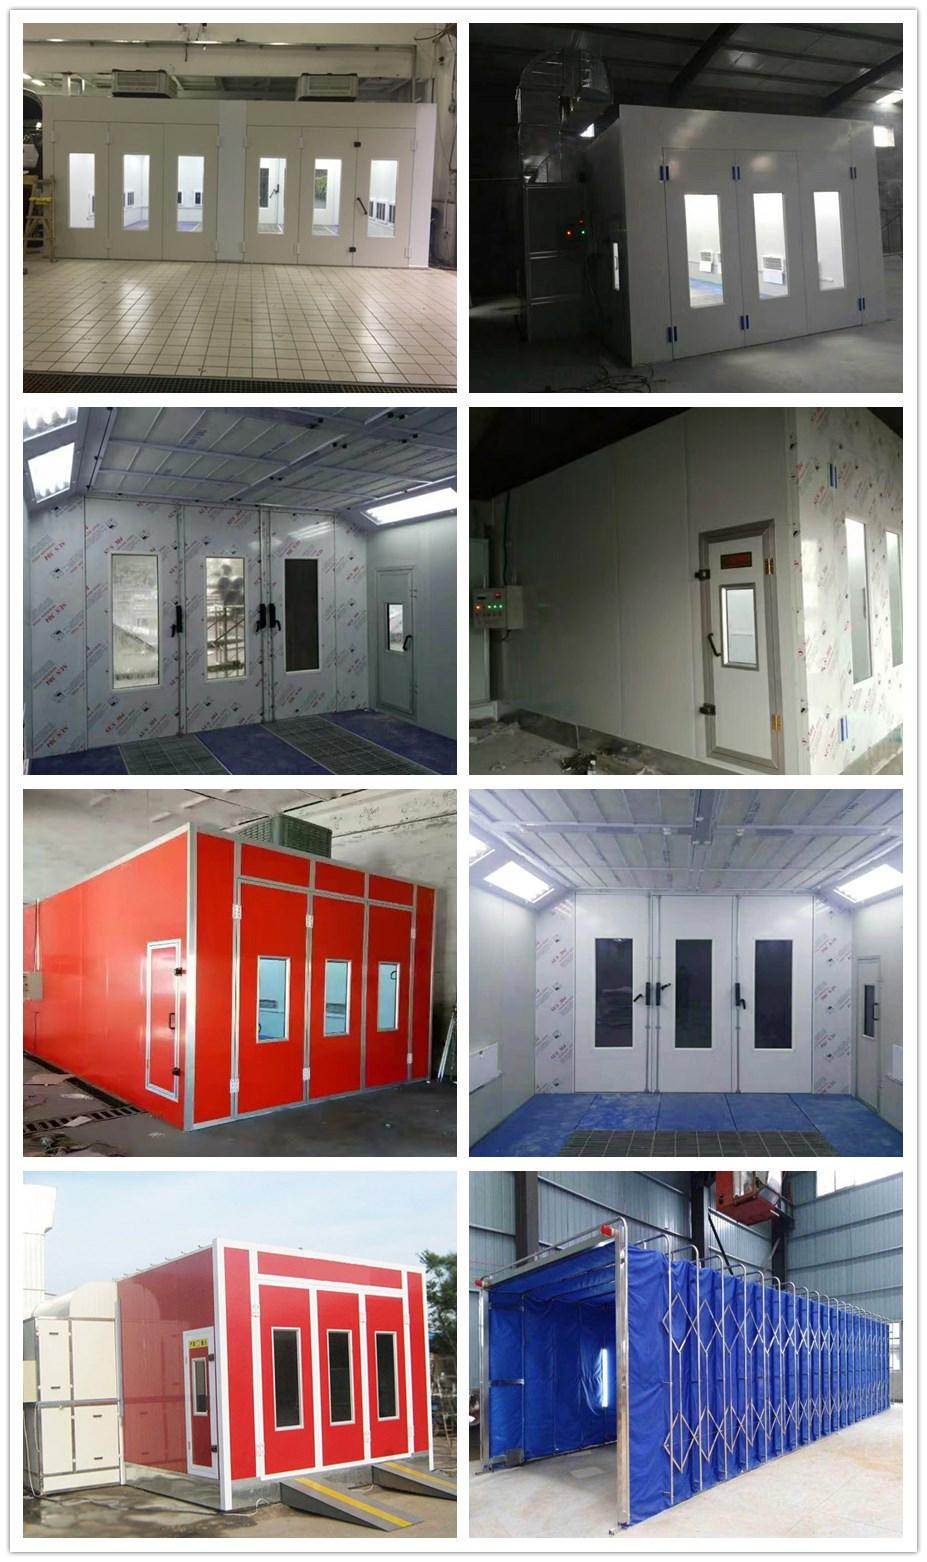 Diesel/Gas/Electric Automotive Large Baking Oven Bus Spray Paint Booth Factory